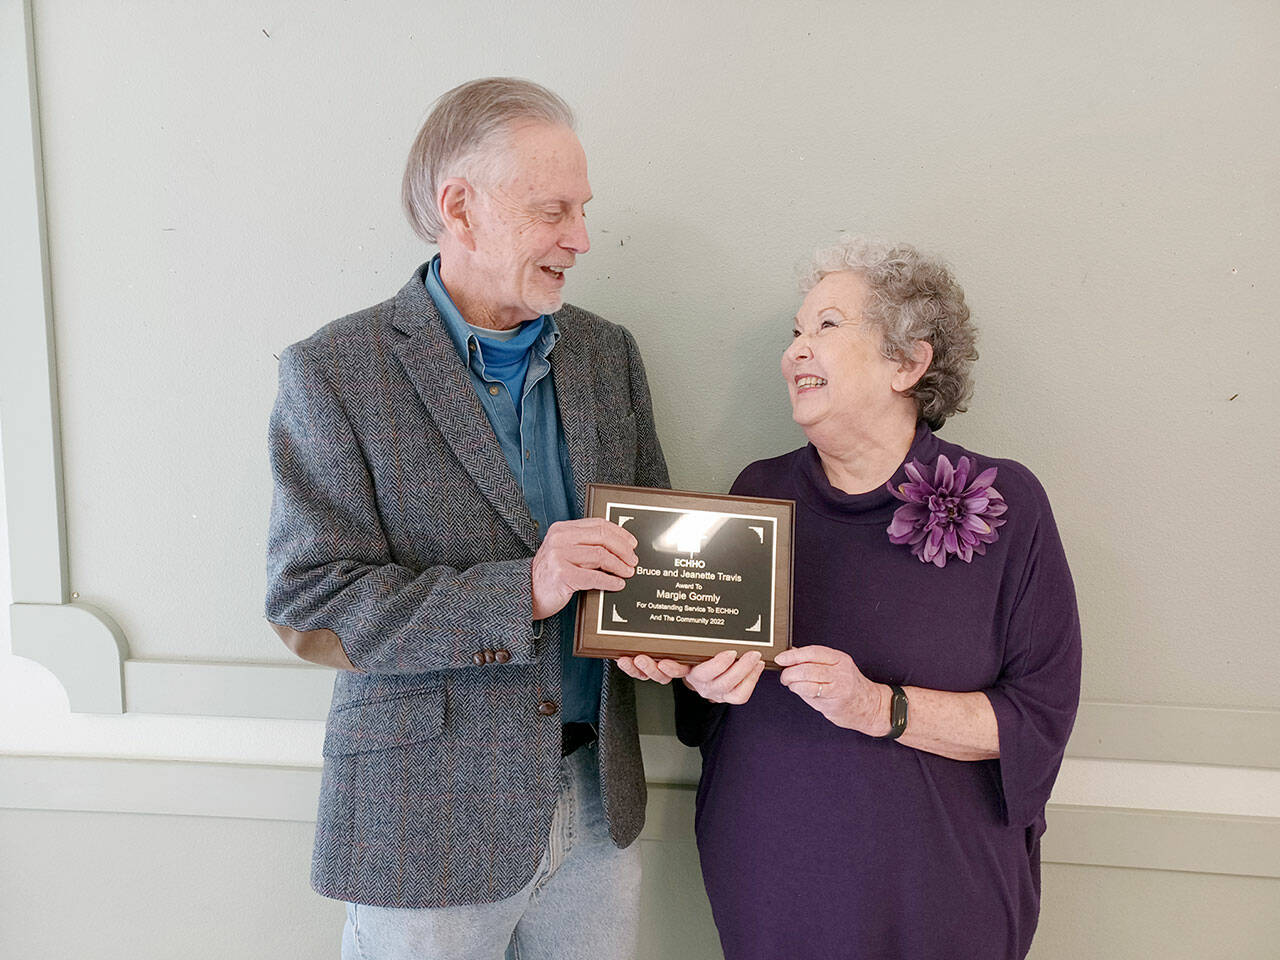 Pictured is David Whitney, ECHHO board chair, presenting the award to Gormly.